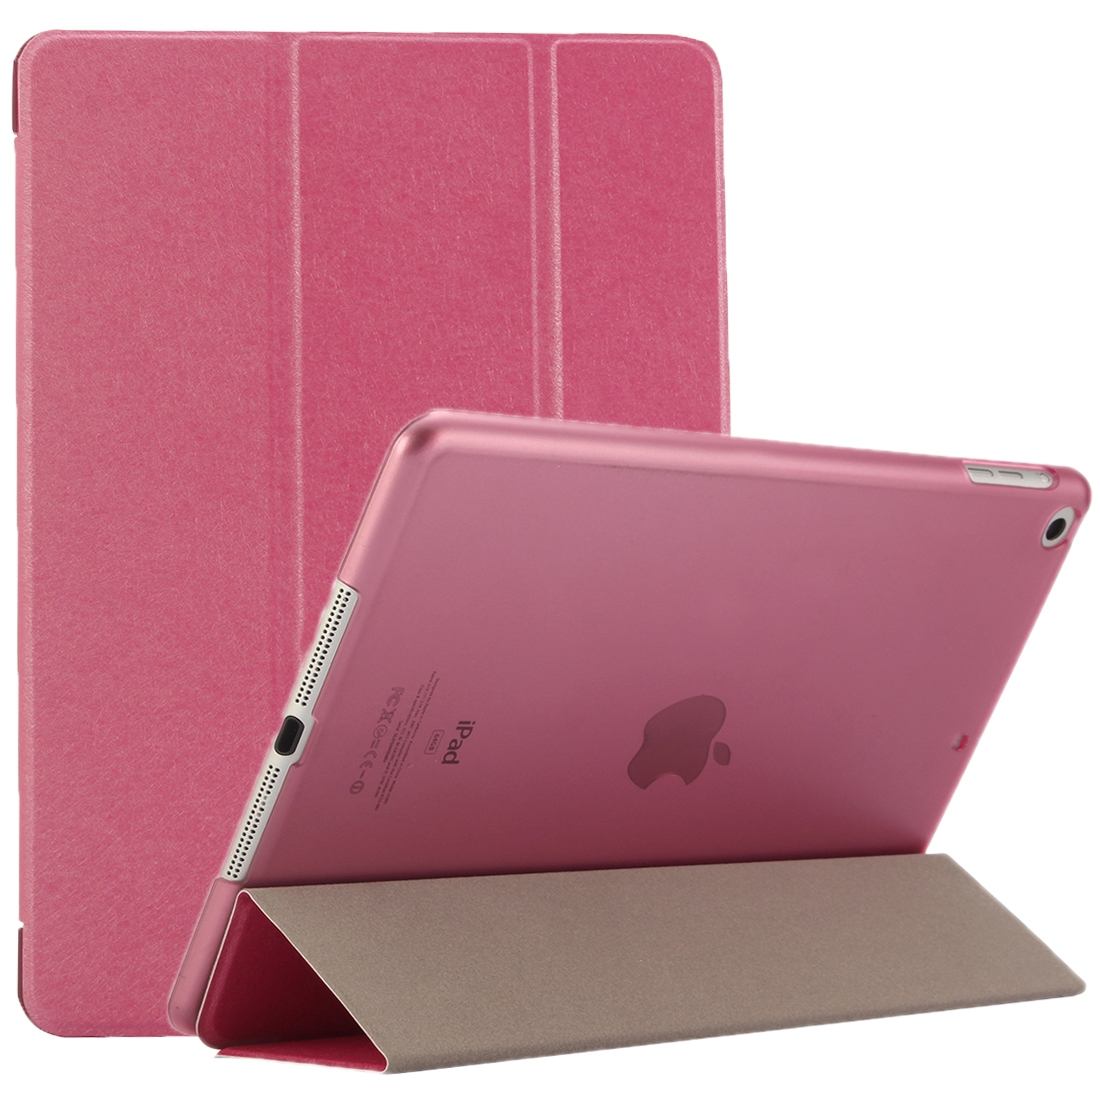 For iPad 2018,2017 9.7in Case,Elegant Silk Textured 3-fold Leather Cover,Magenta